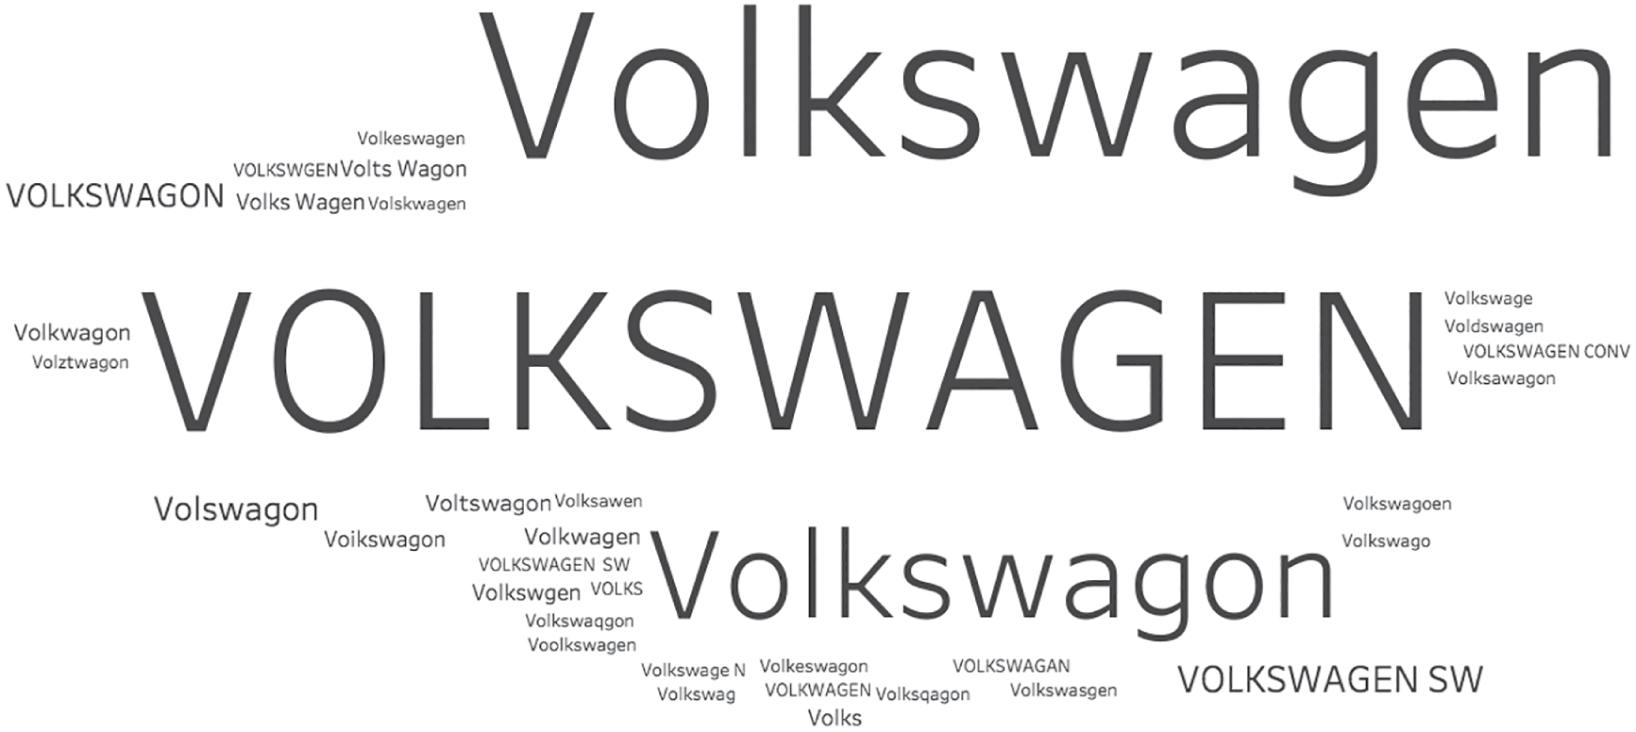 Illustration of a word cloud depicting the 36 different ways Volkswagen was spelled in the data set.